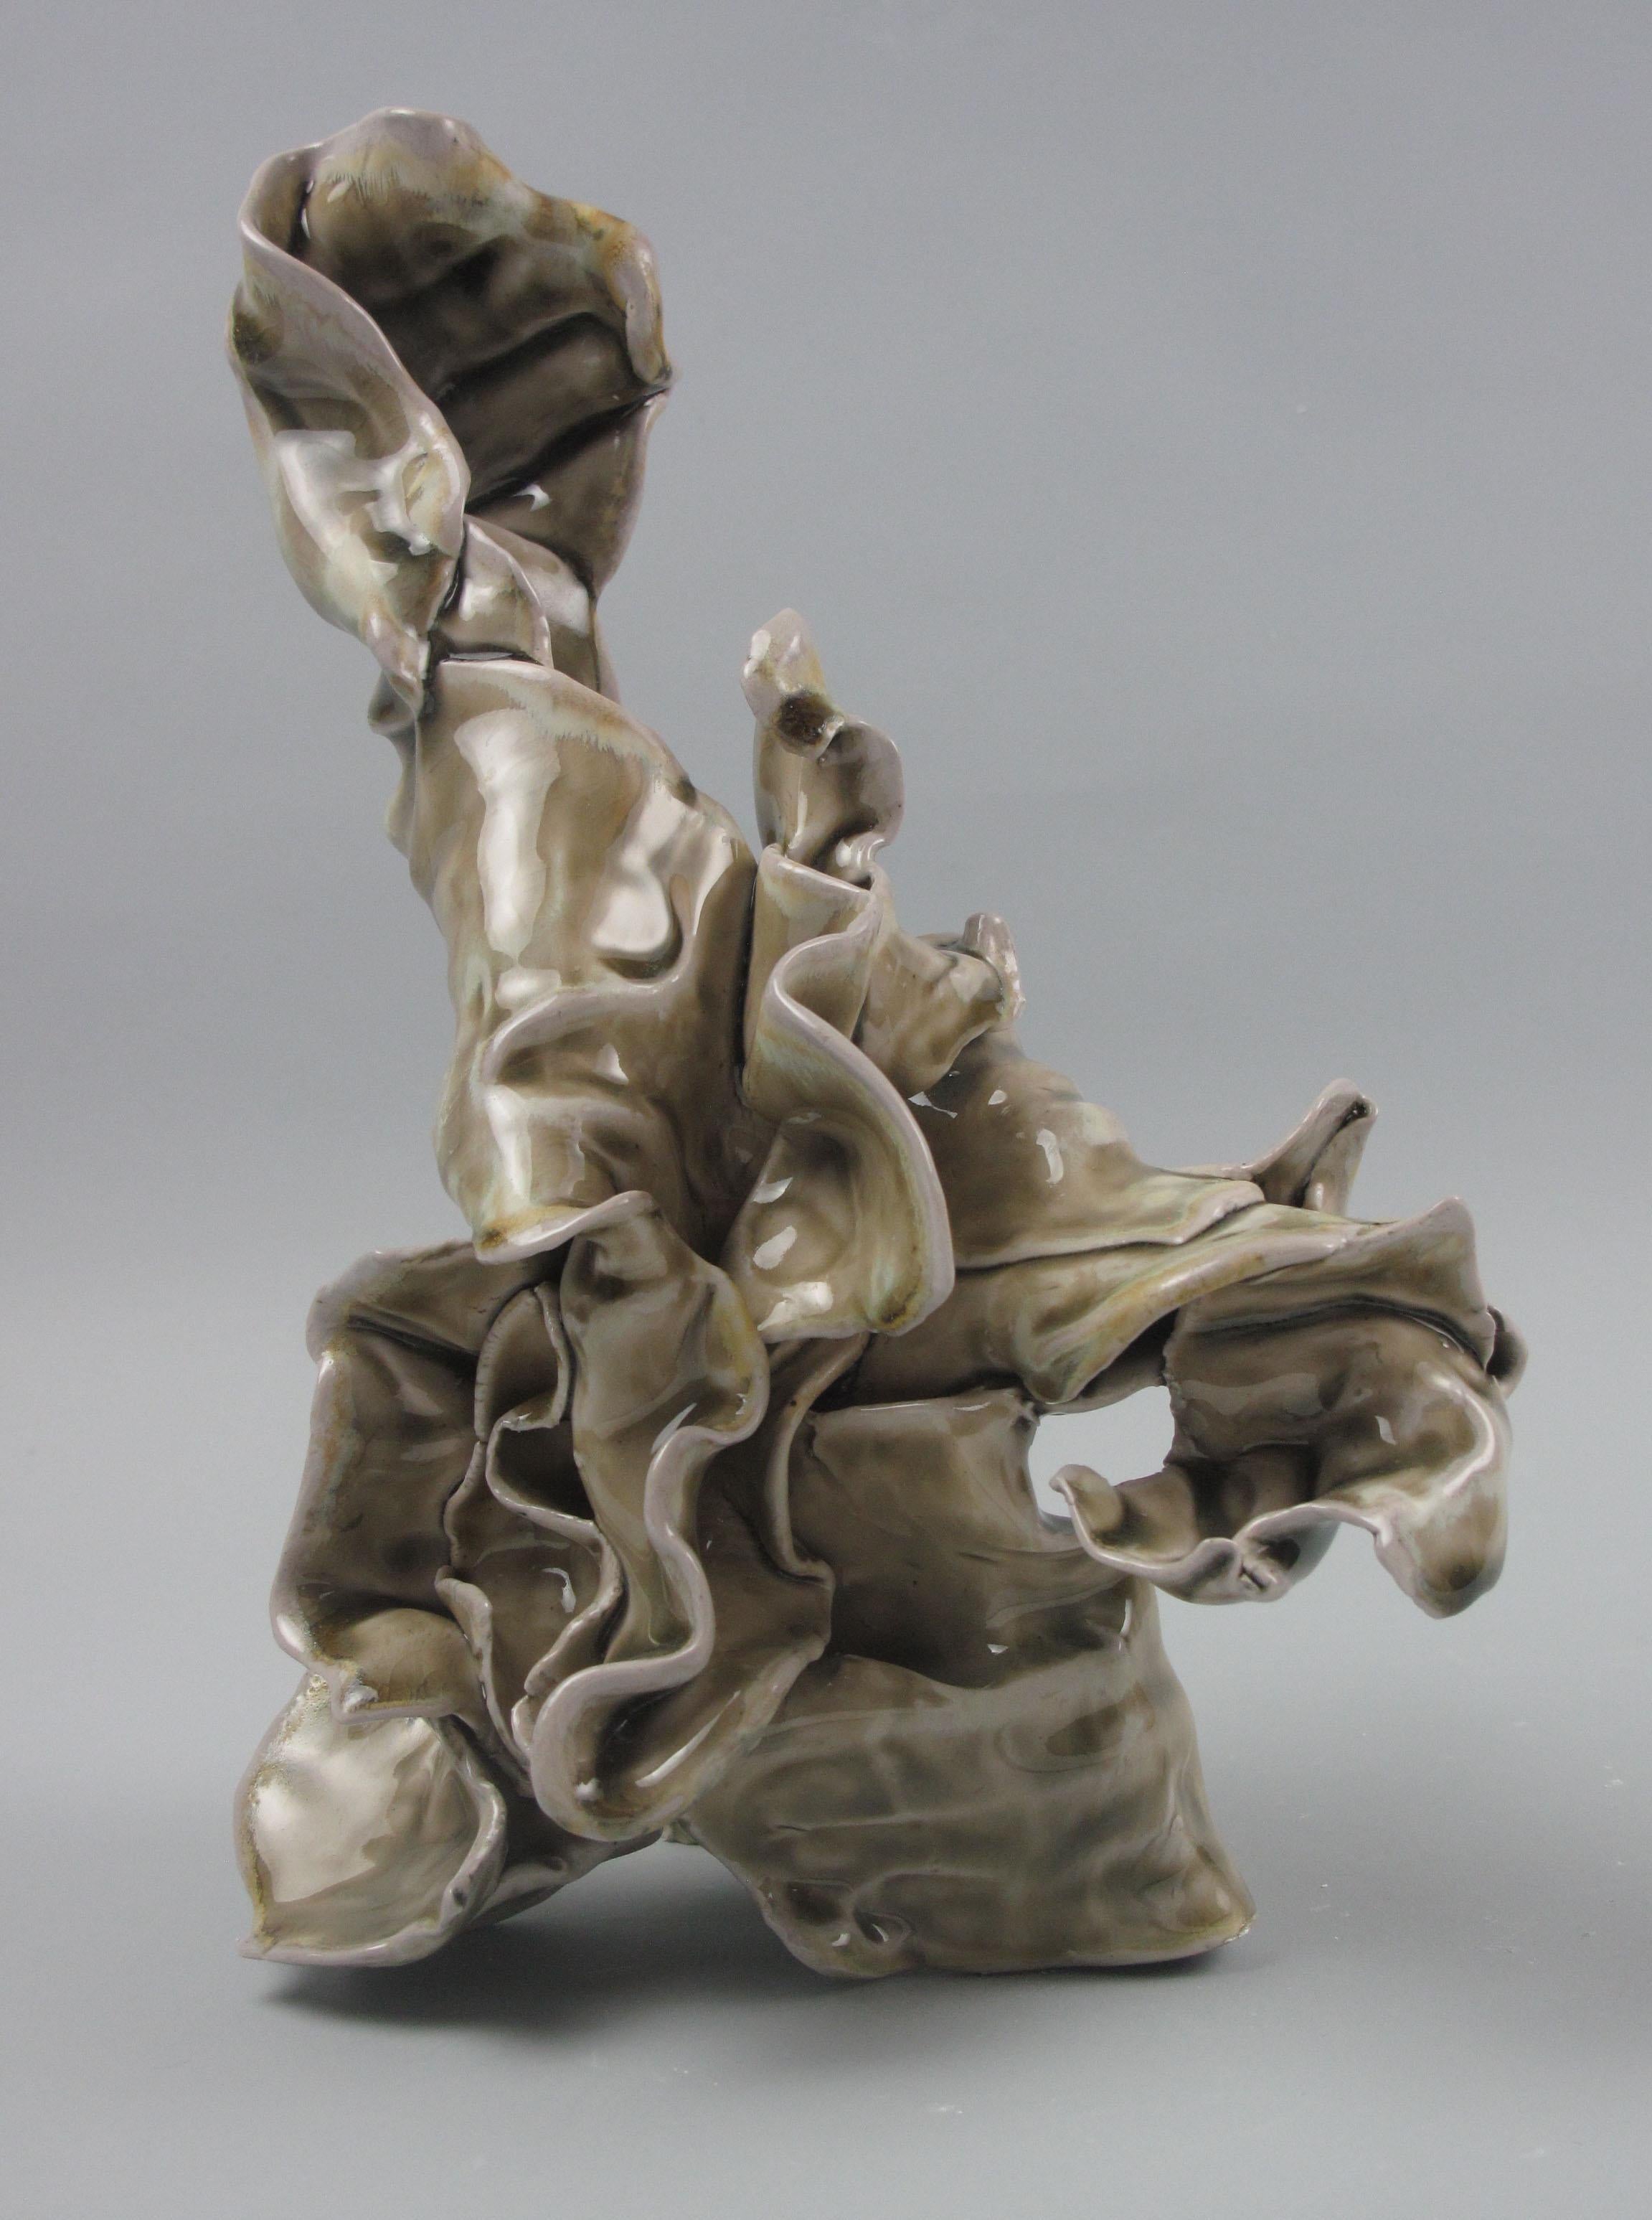 Sara Fine-Wilsons ”Carry” is a gestural 11 x 7 x 6 inch ceramic sculpture in pale celadon green with accents of warm yellow, brown and white. In this graceful and evocative sculpture individual slab elements are assembled, layered in glaze and soda